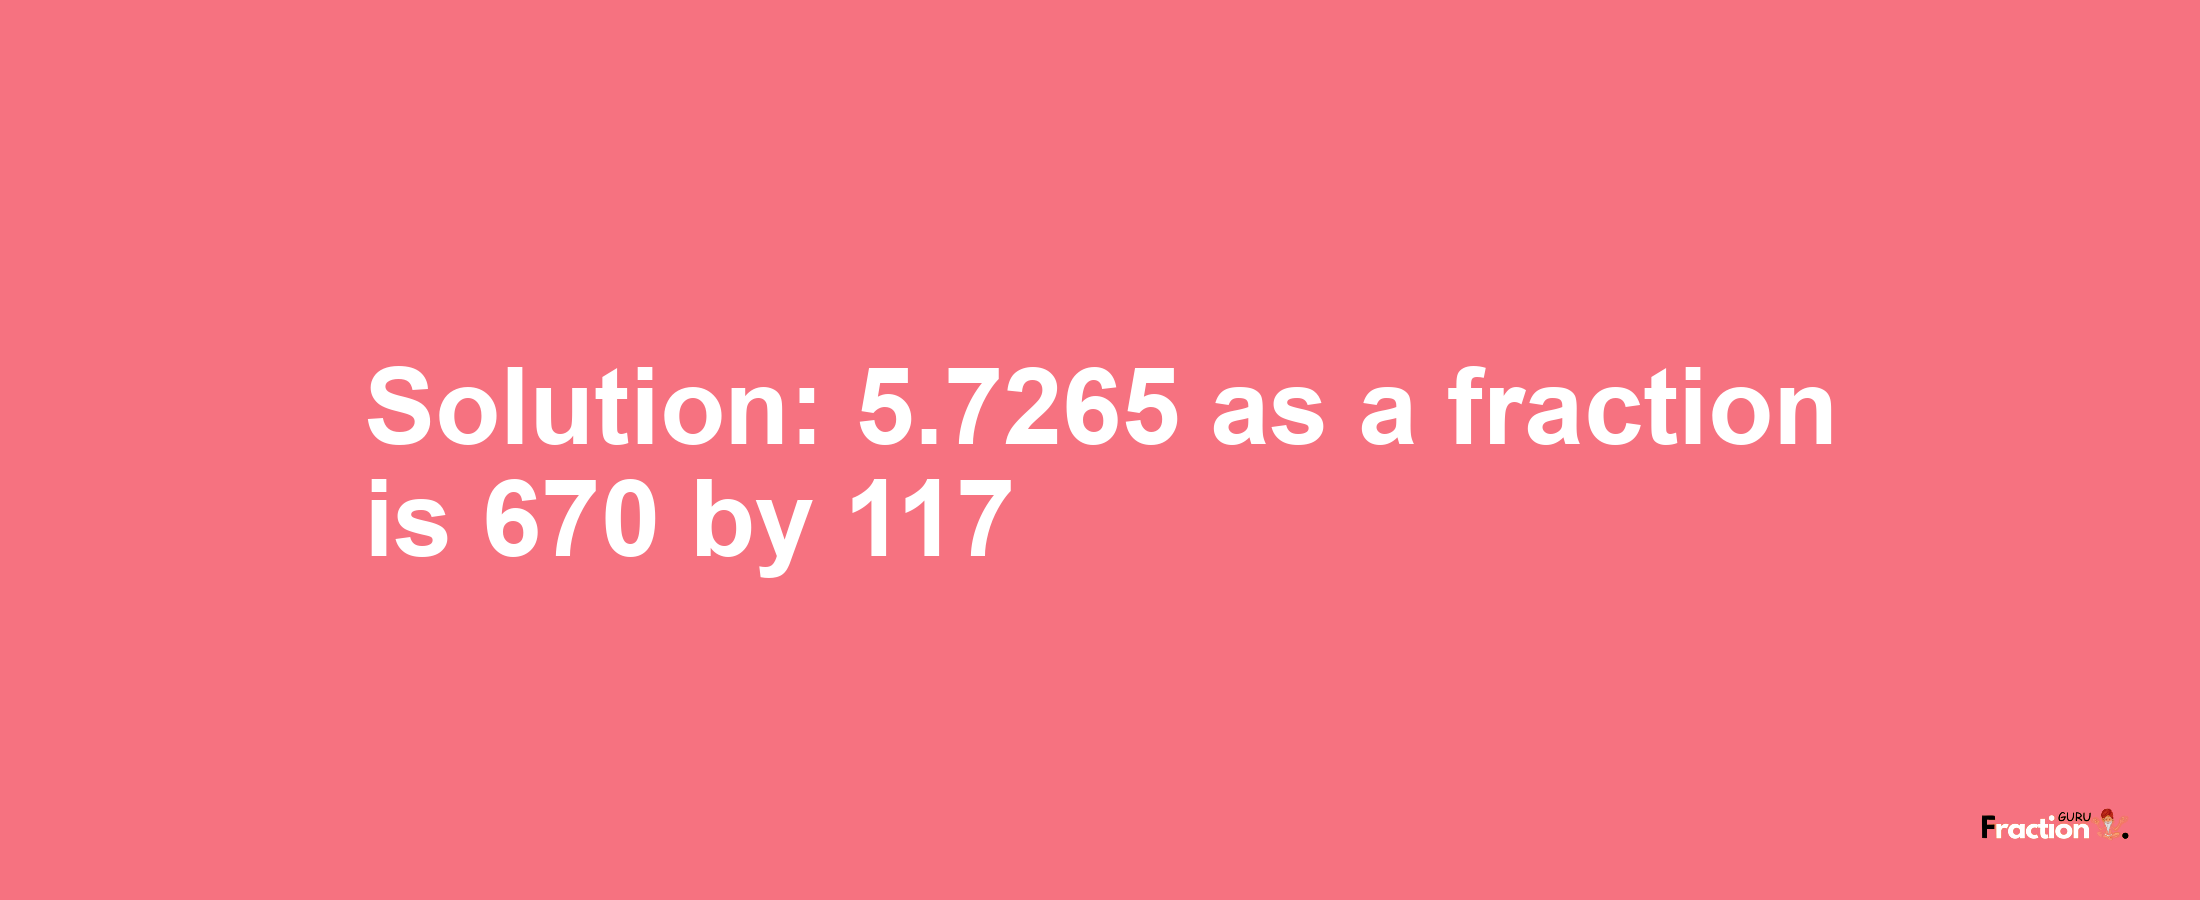 Solution:5.7265 as a fraction is 670/117